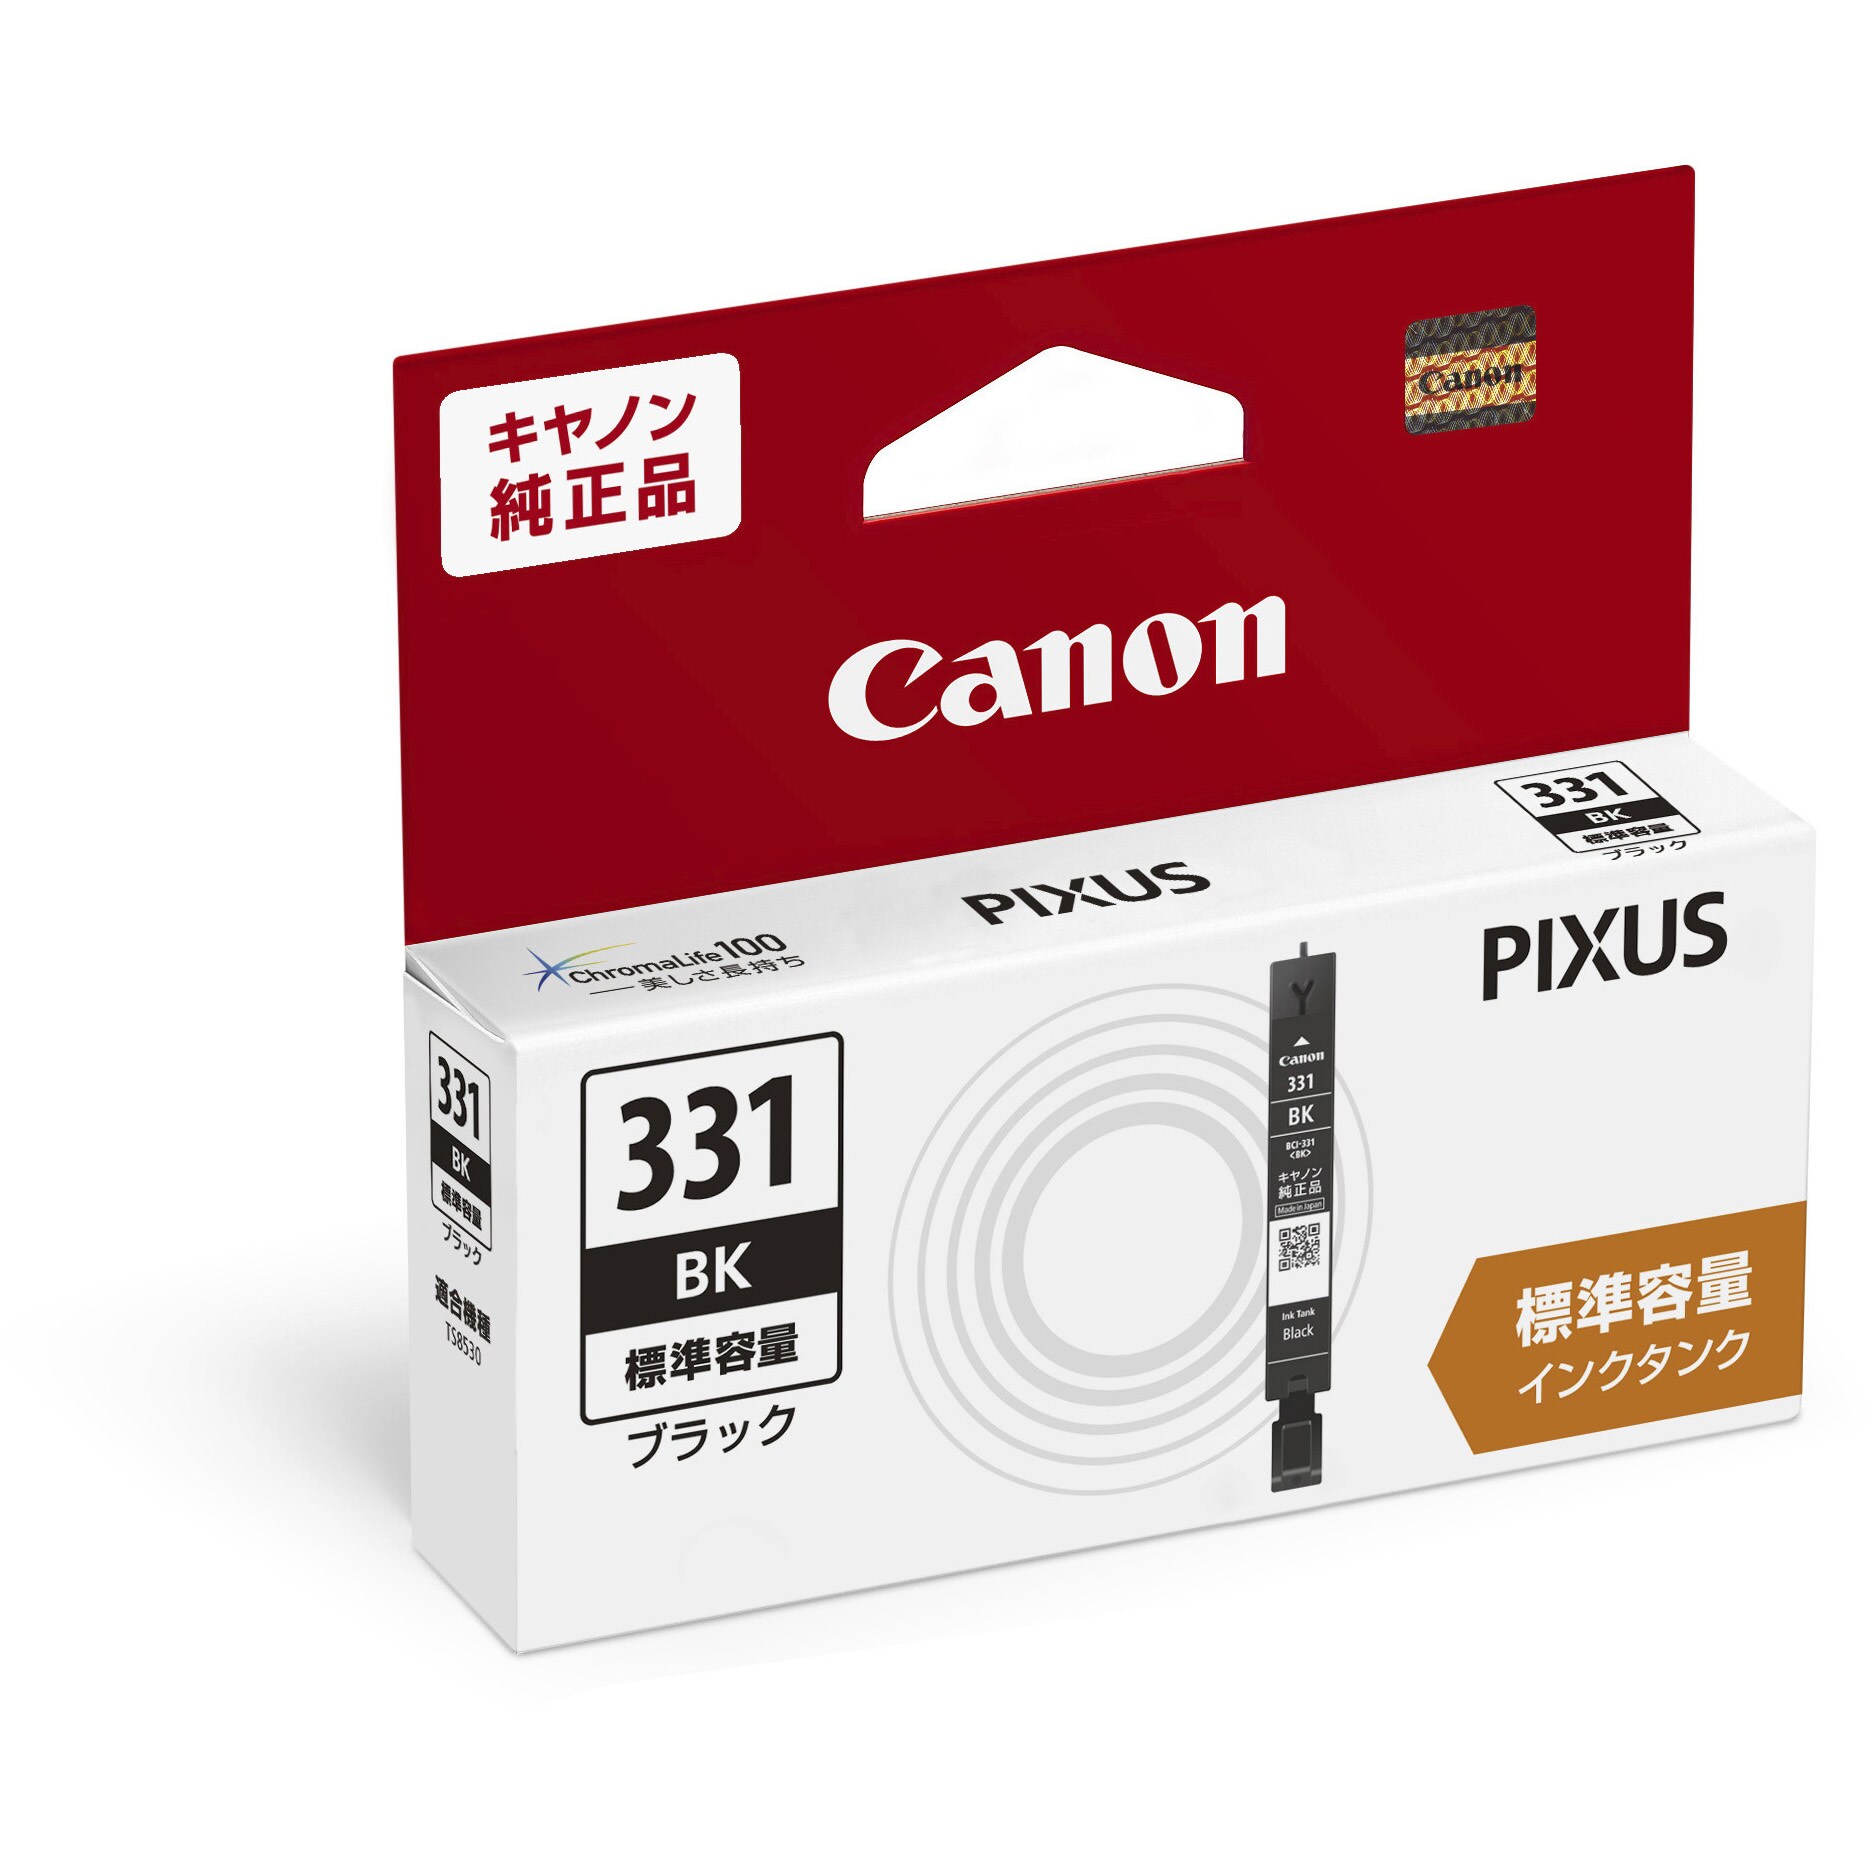 Canon 331 インク トナー カートリッジ - その他